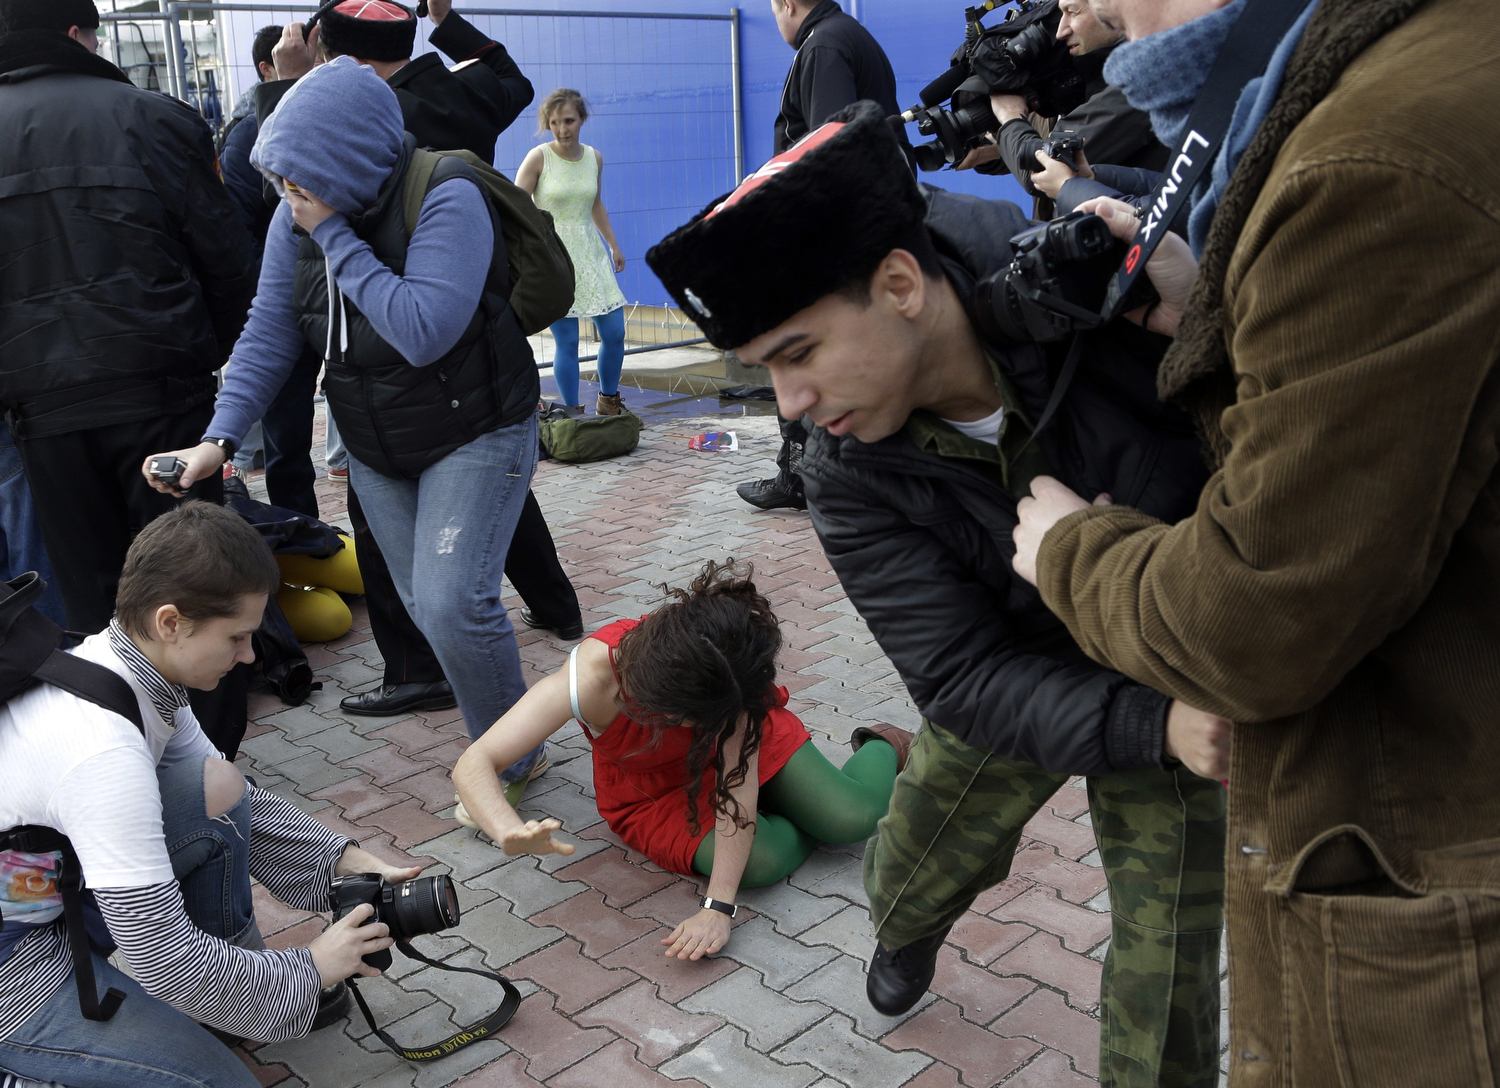 A member of the punk group Pussy Riot lies on the ground as the group are attacked by Cossack militia in Sochi, Russia, on Wednesday, Feb. 19, 2014.